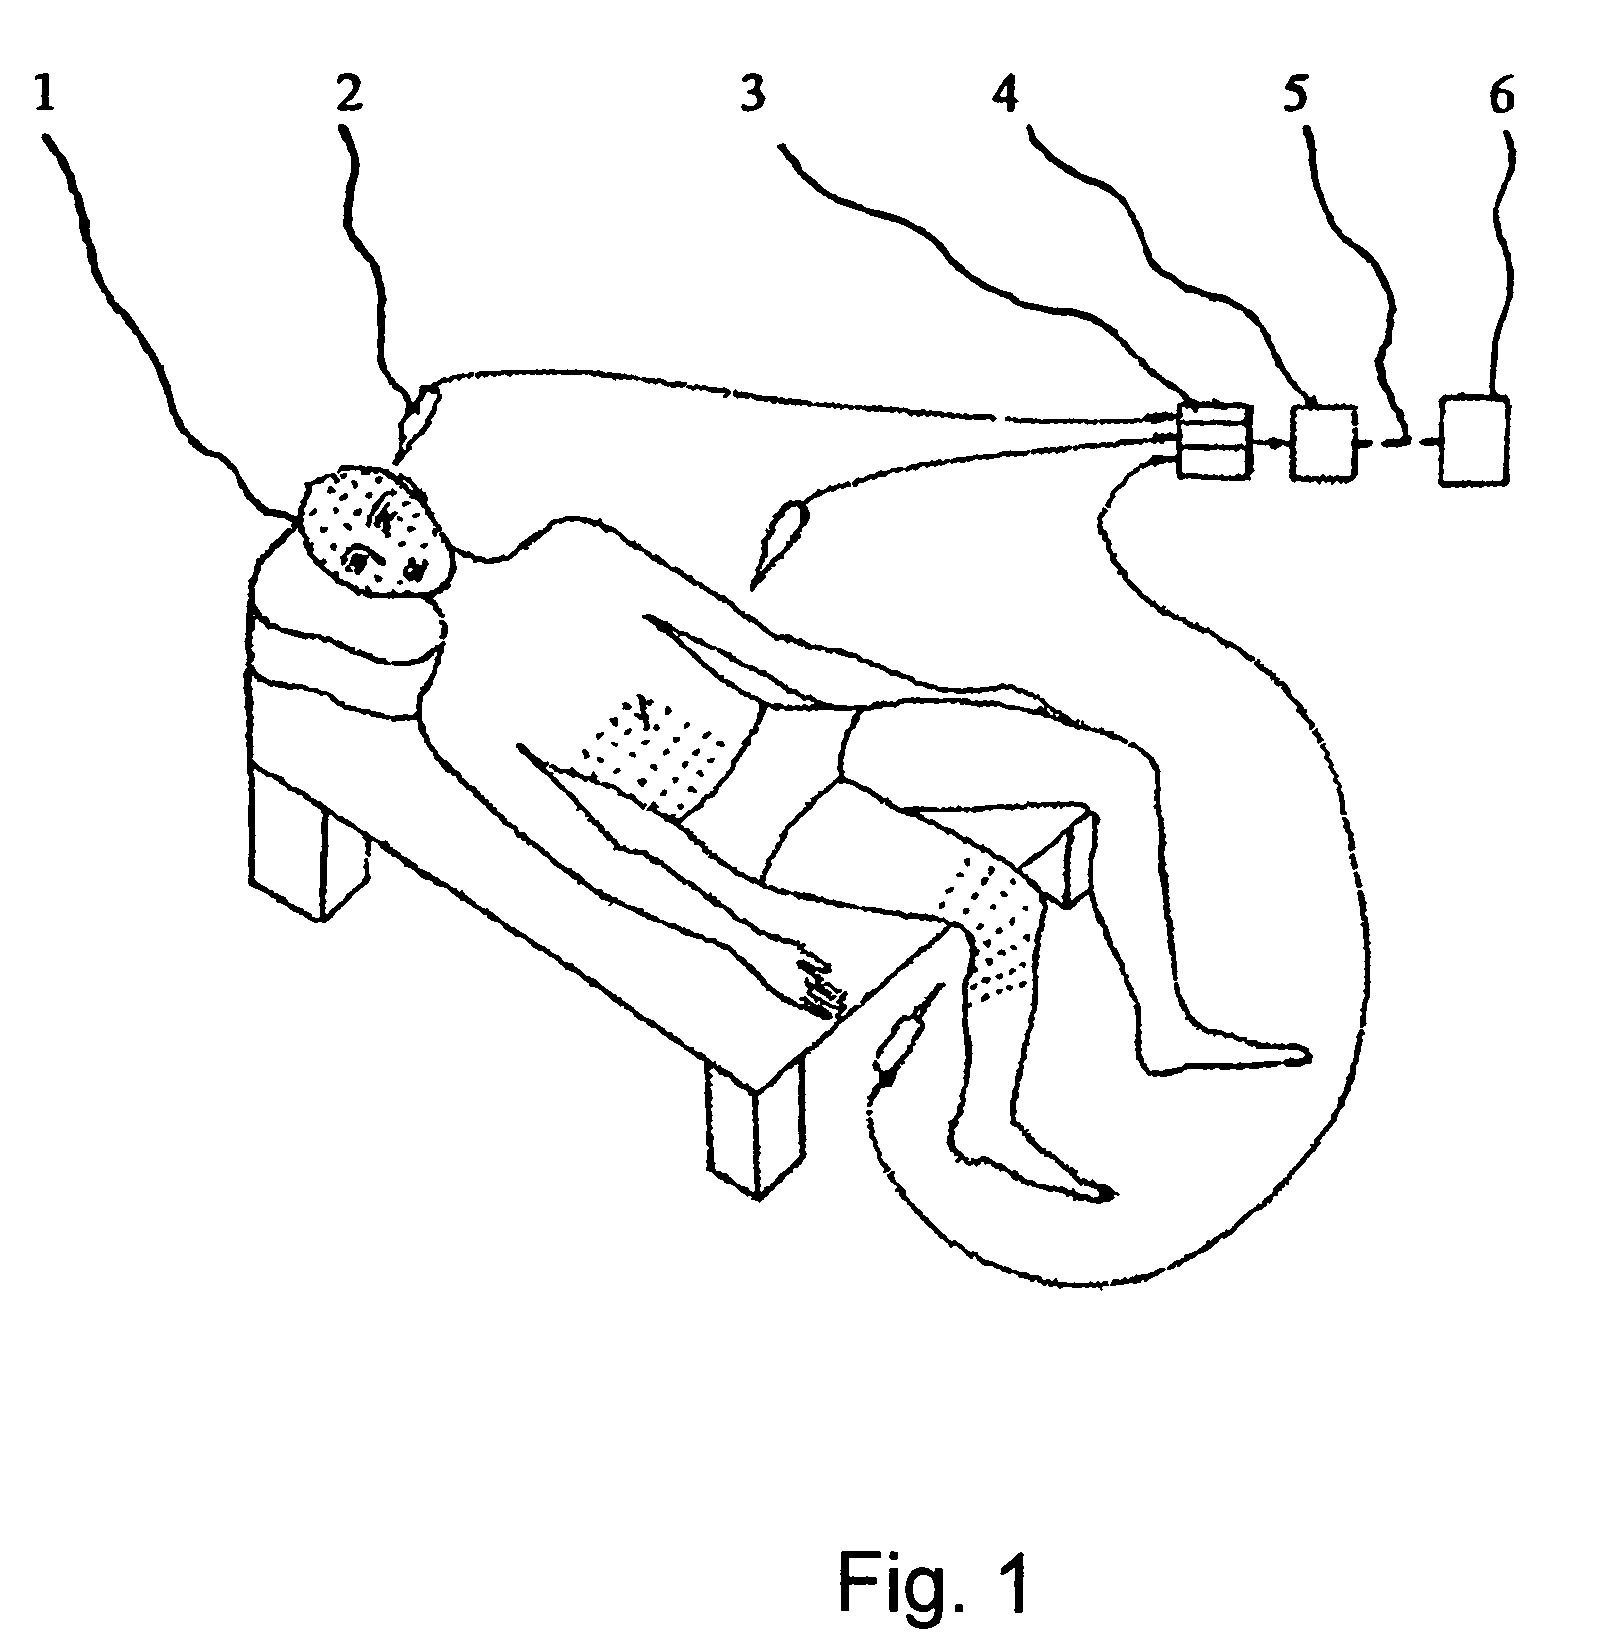 Method for thermal diagnosis of pathology of a bioobject and device for carrying out said method